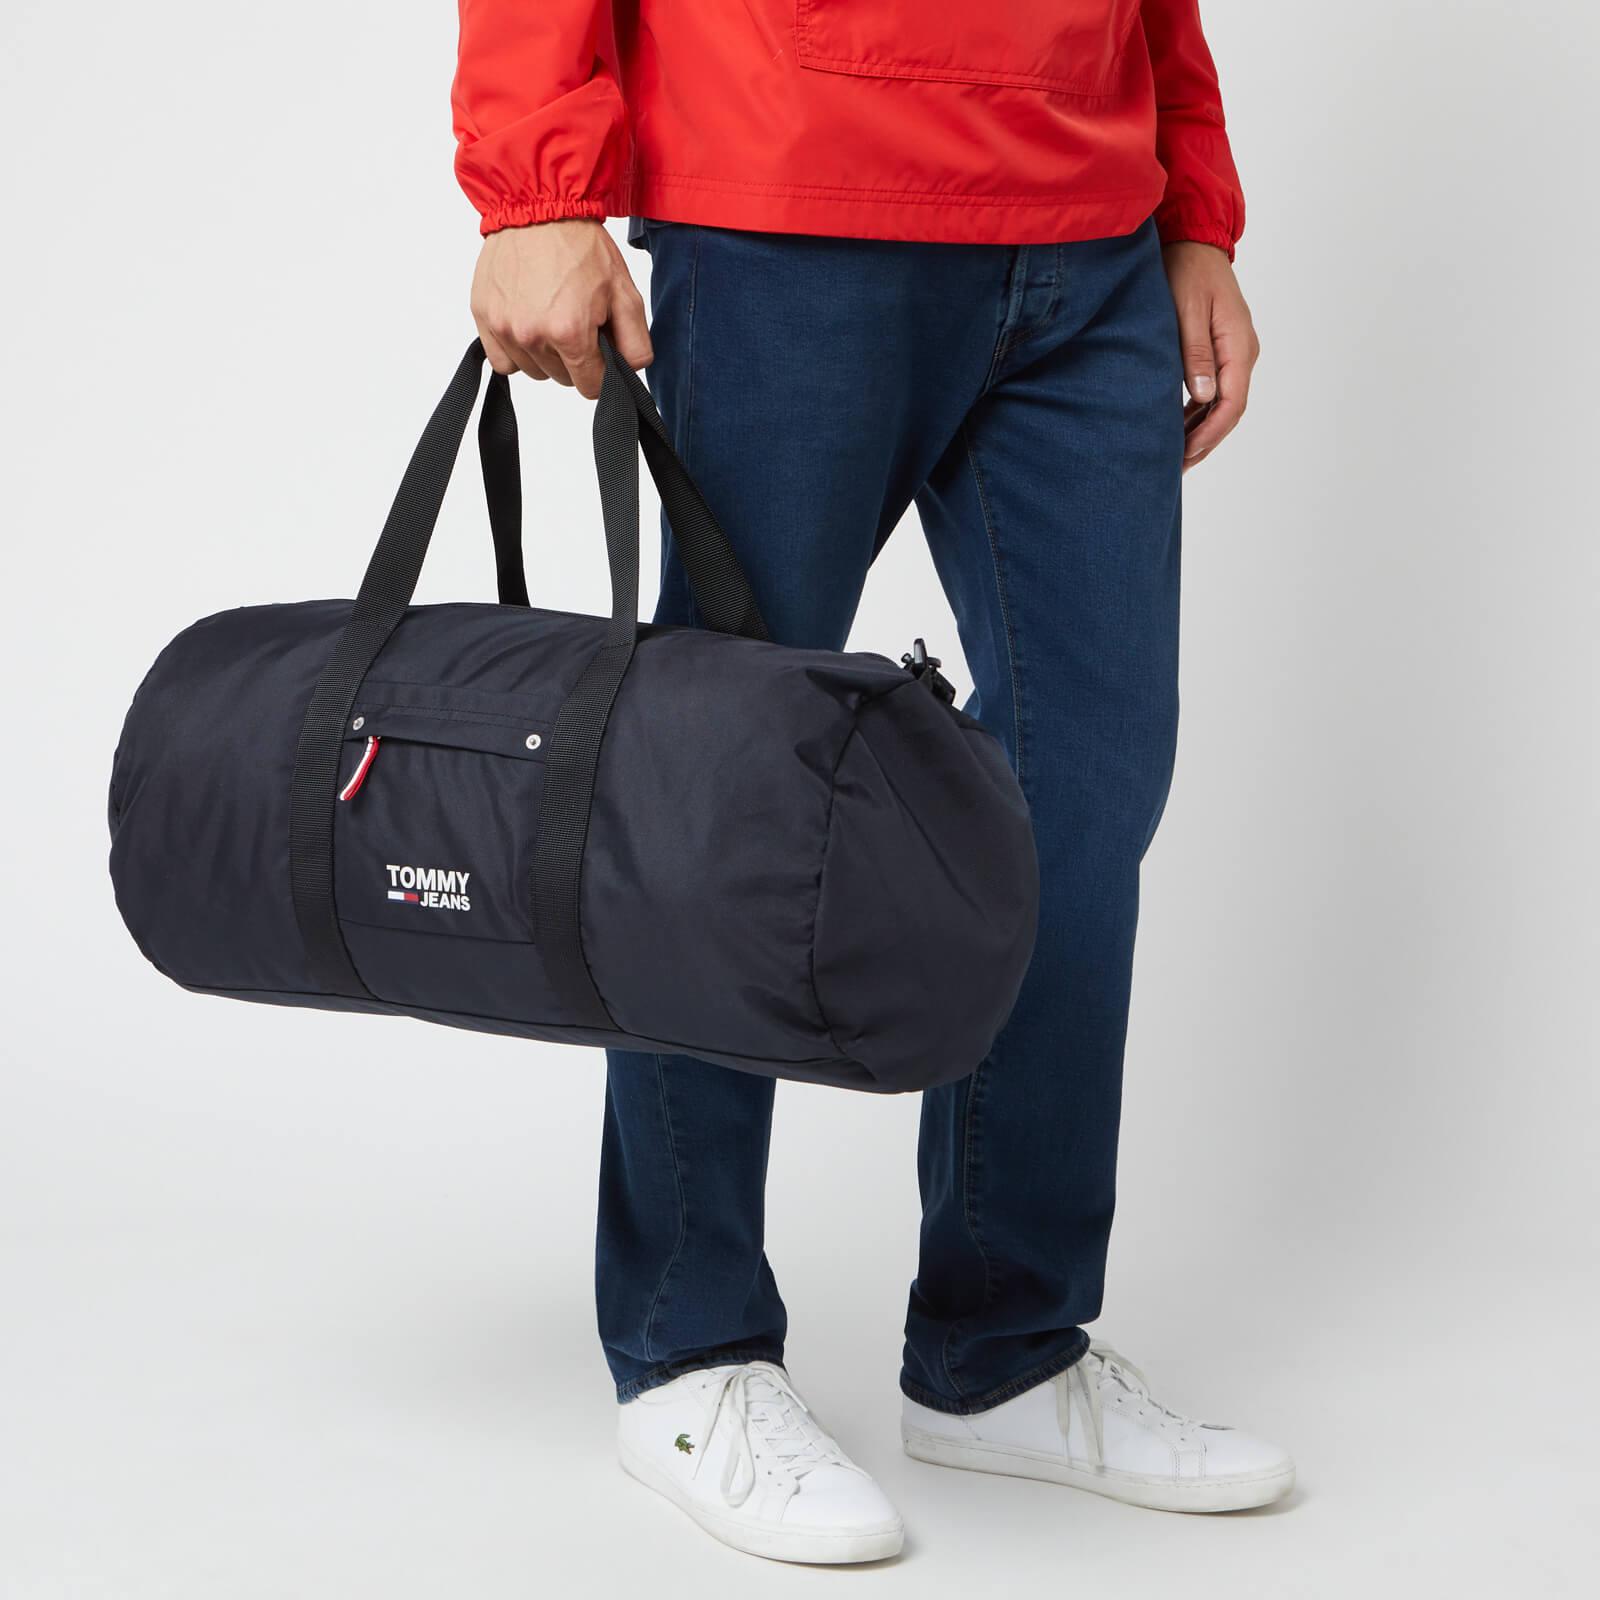 cool tote tommy hilfiger